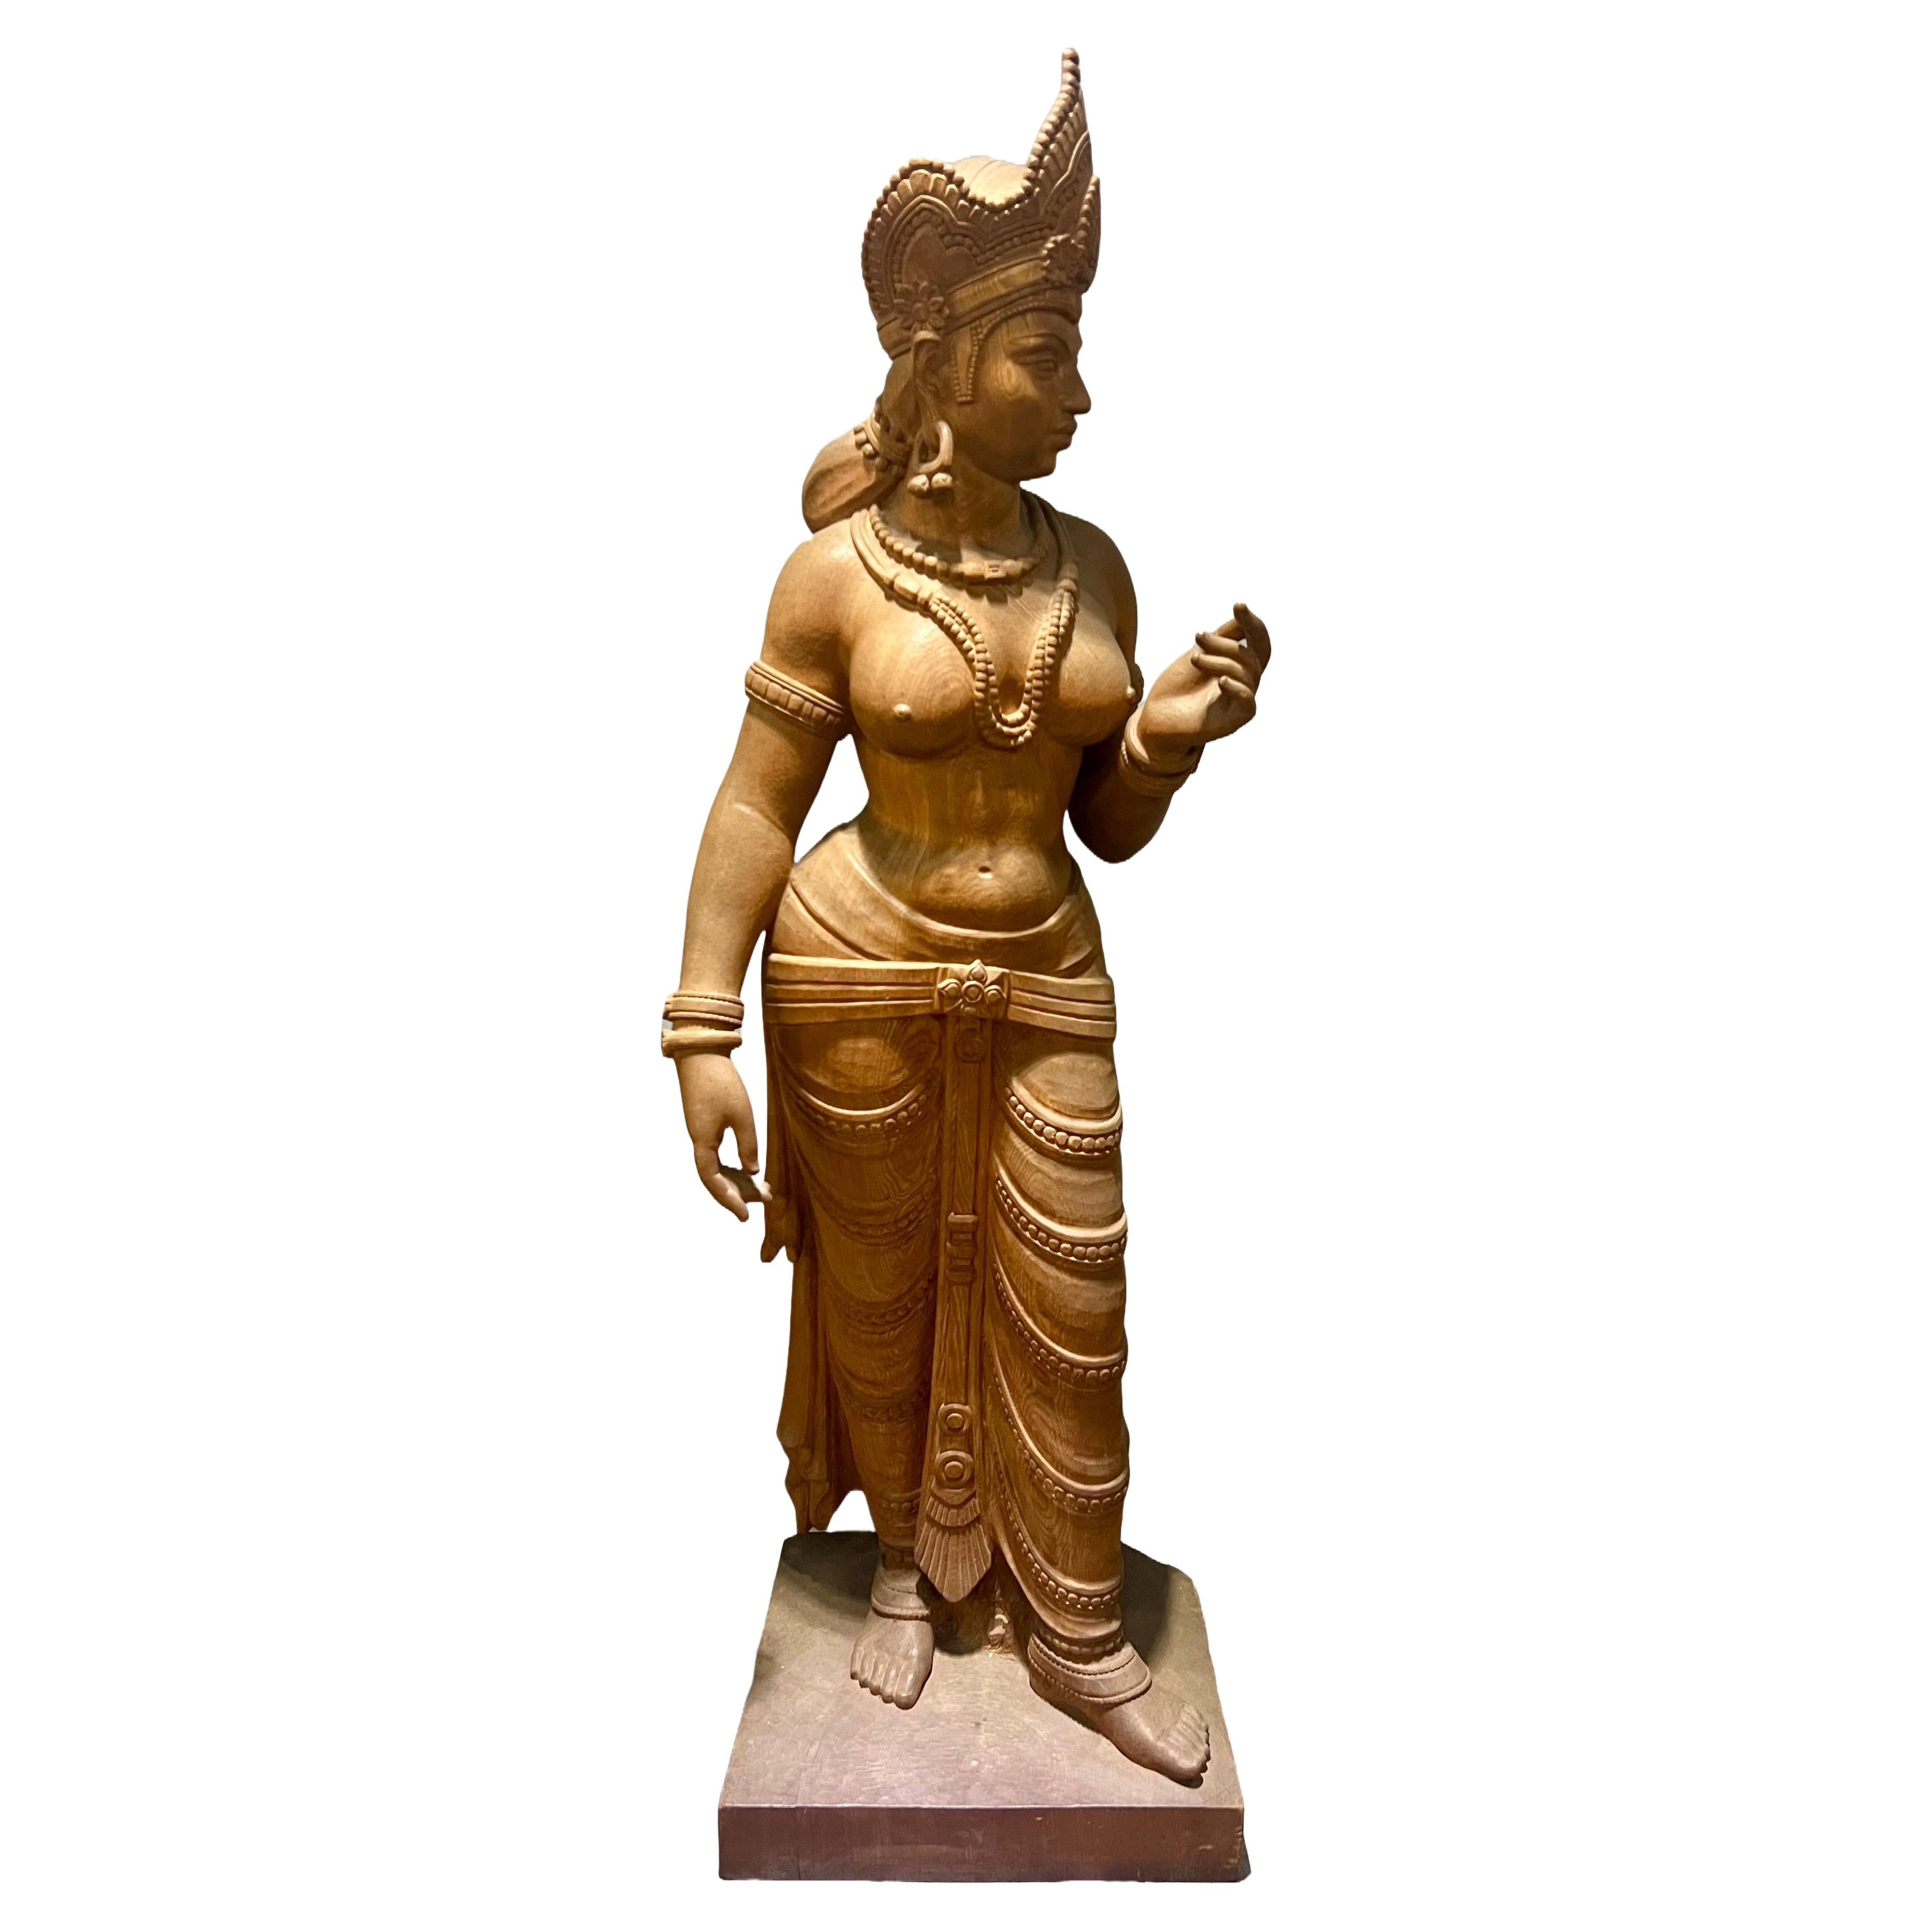 A life-size carved wood sculpture of the Hindu goddess Parvati For Sale